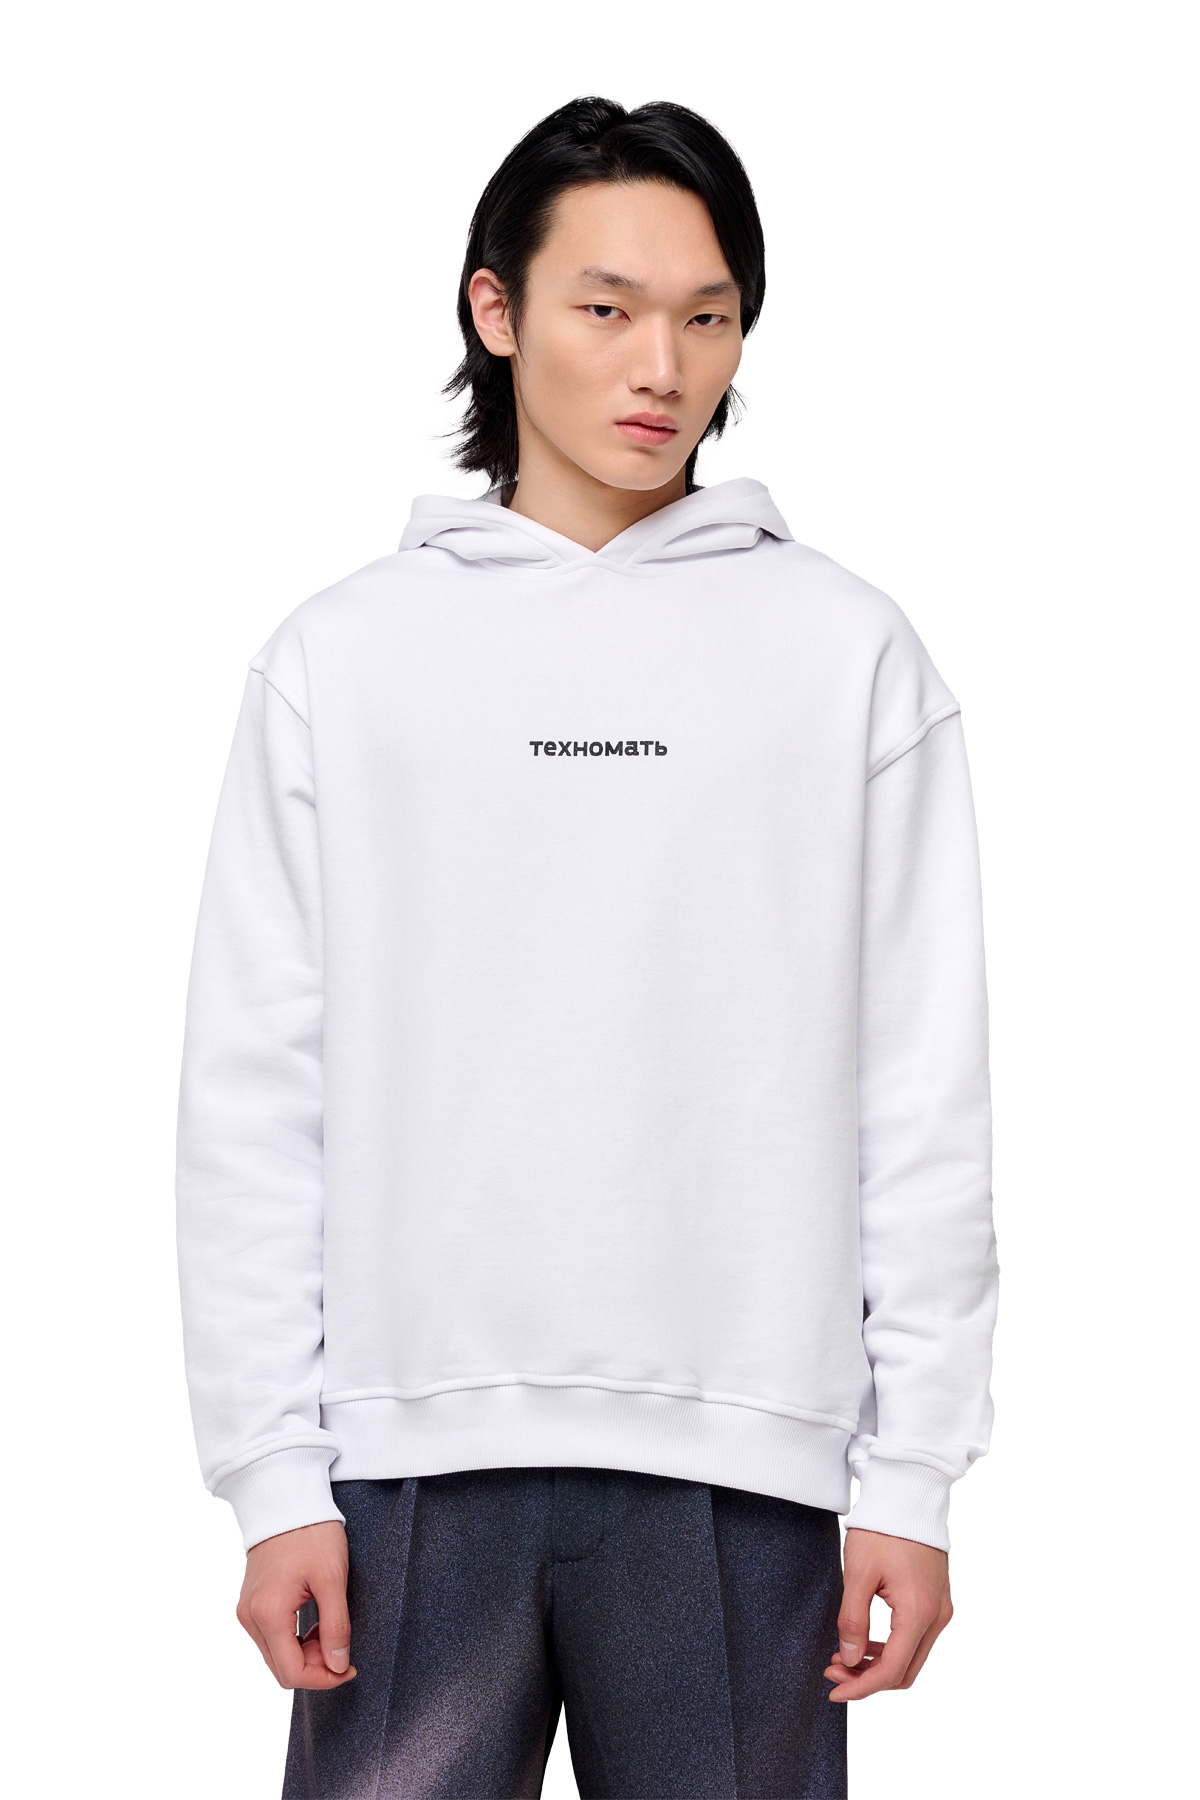 Techno Mother hoodie